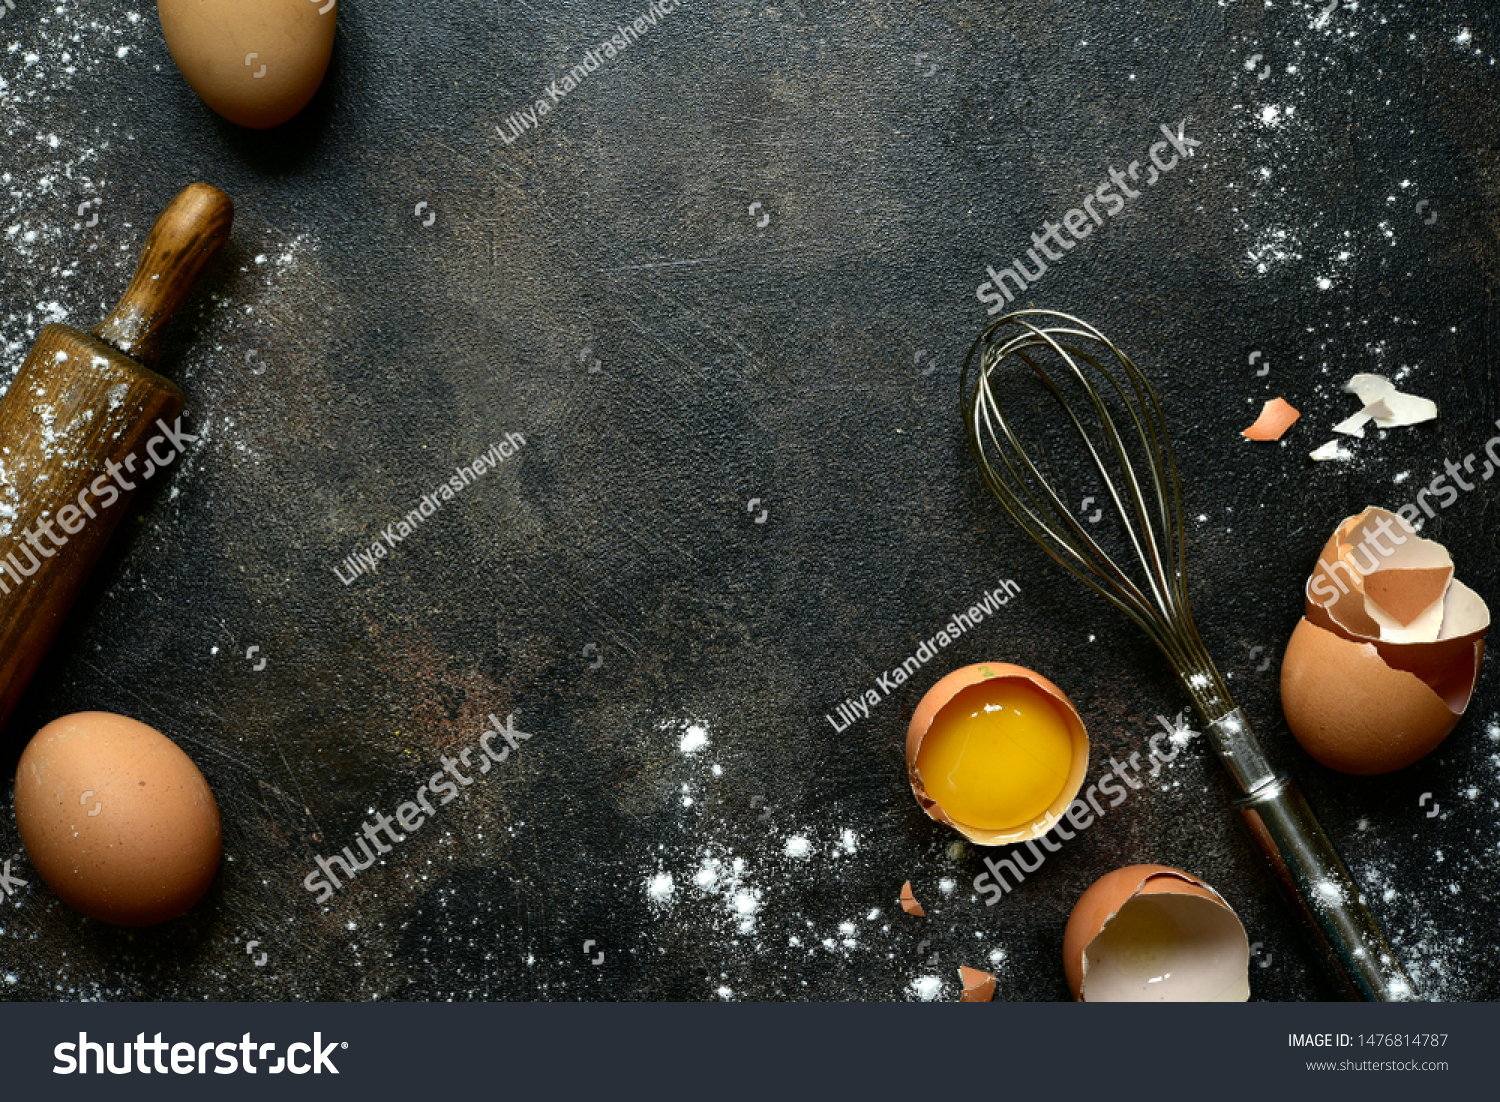 Culinary background with ingredients for baking : milk, butter,sugar, dough and egg on a dark slate, stone or concrete table. Top view with copy space. #1476814787